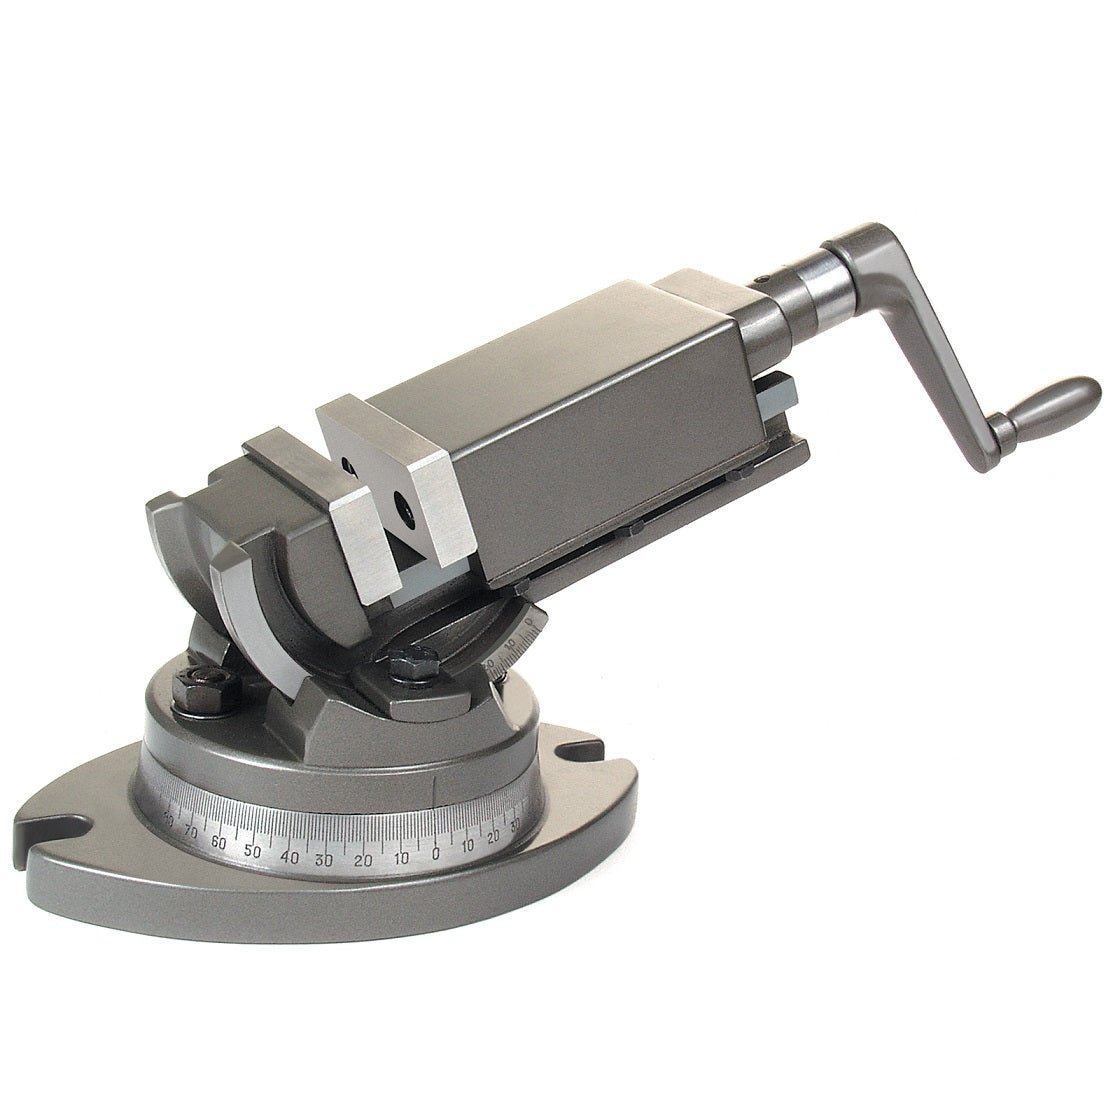 Two Way Milling Machine Vise - Micro - Mark Power Tool Accessories